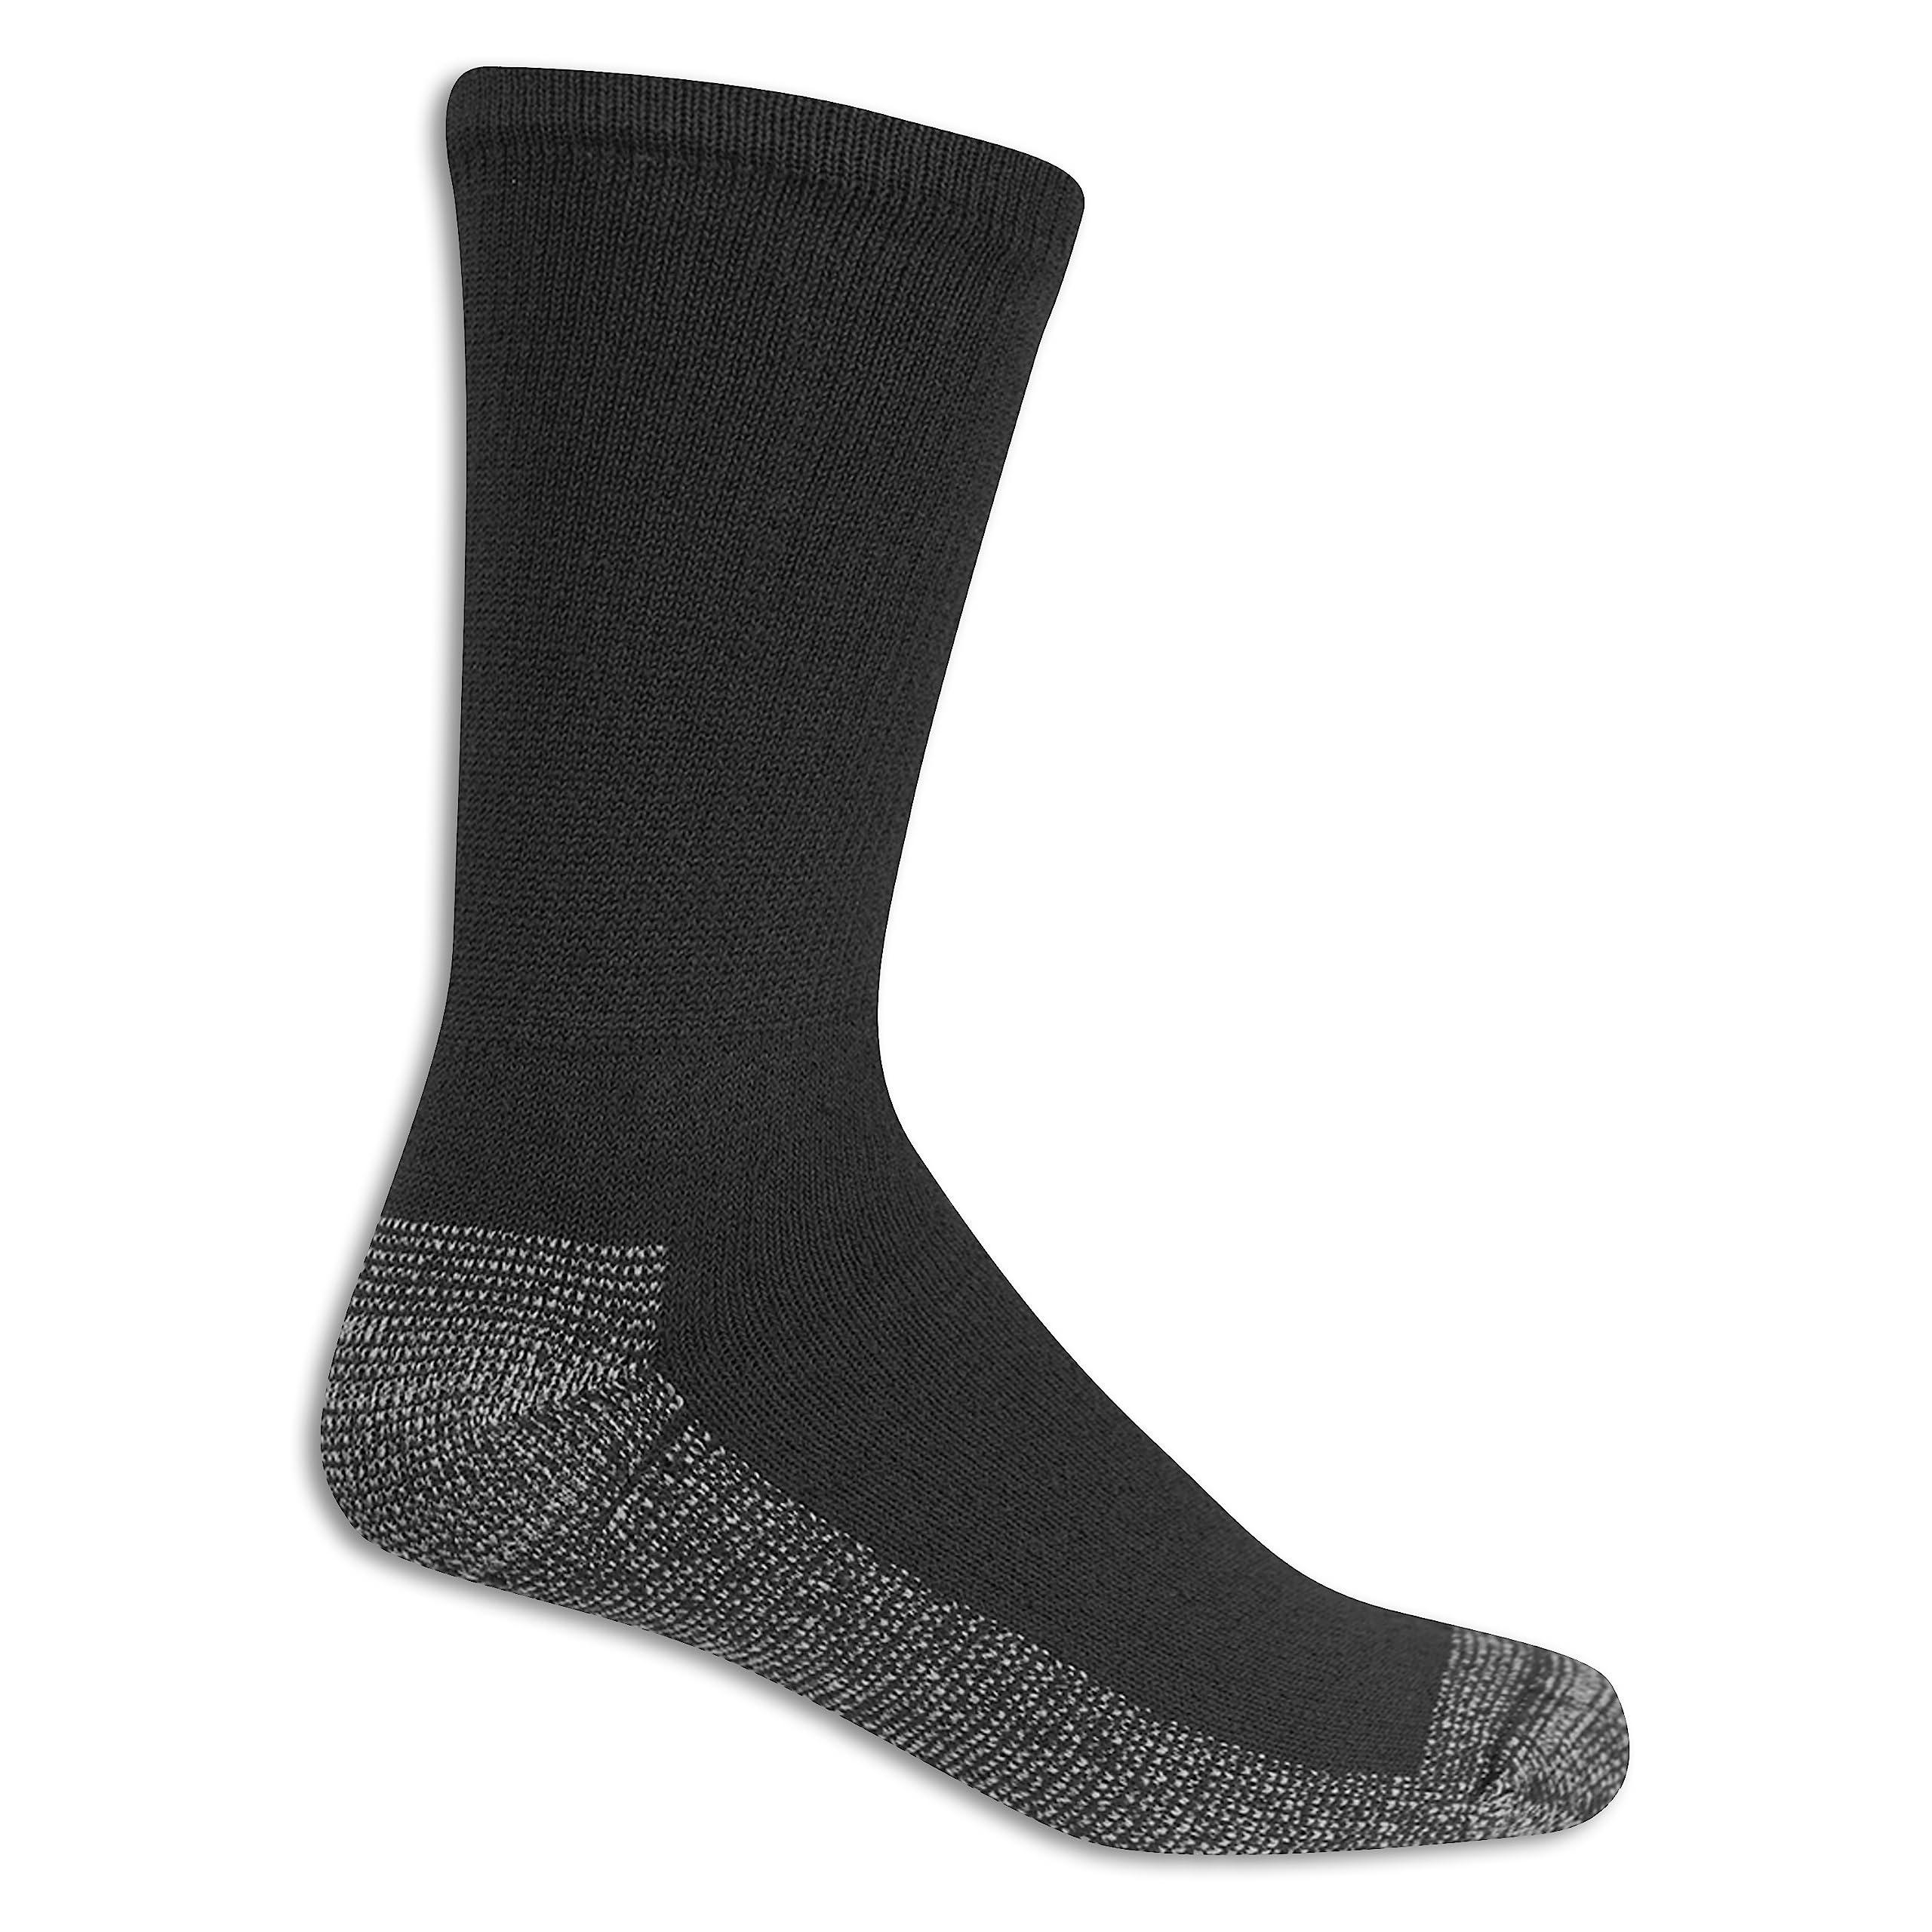 Fruit of the Loom mens Cushioned Durable Cotton Work Gear Socks With Moisture Wicking